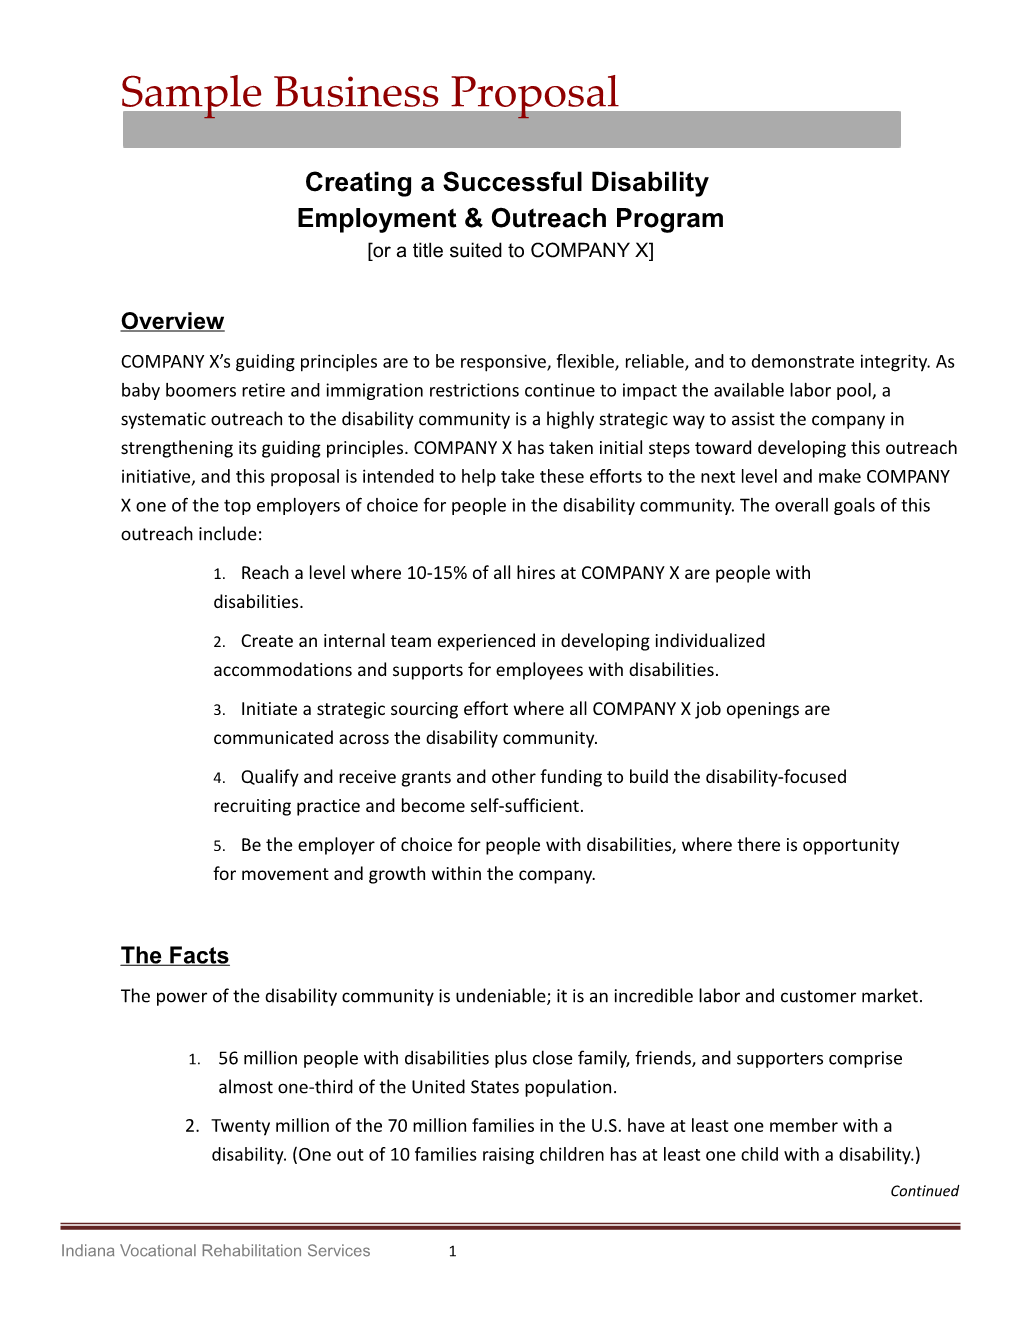 Creating a Successful Disability